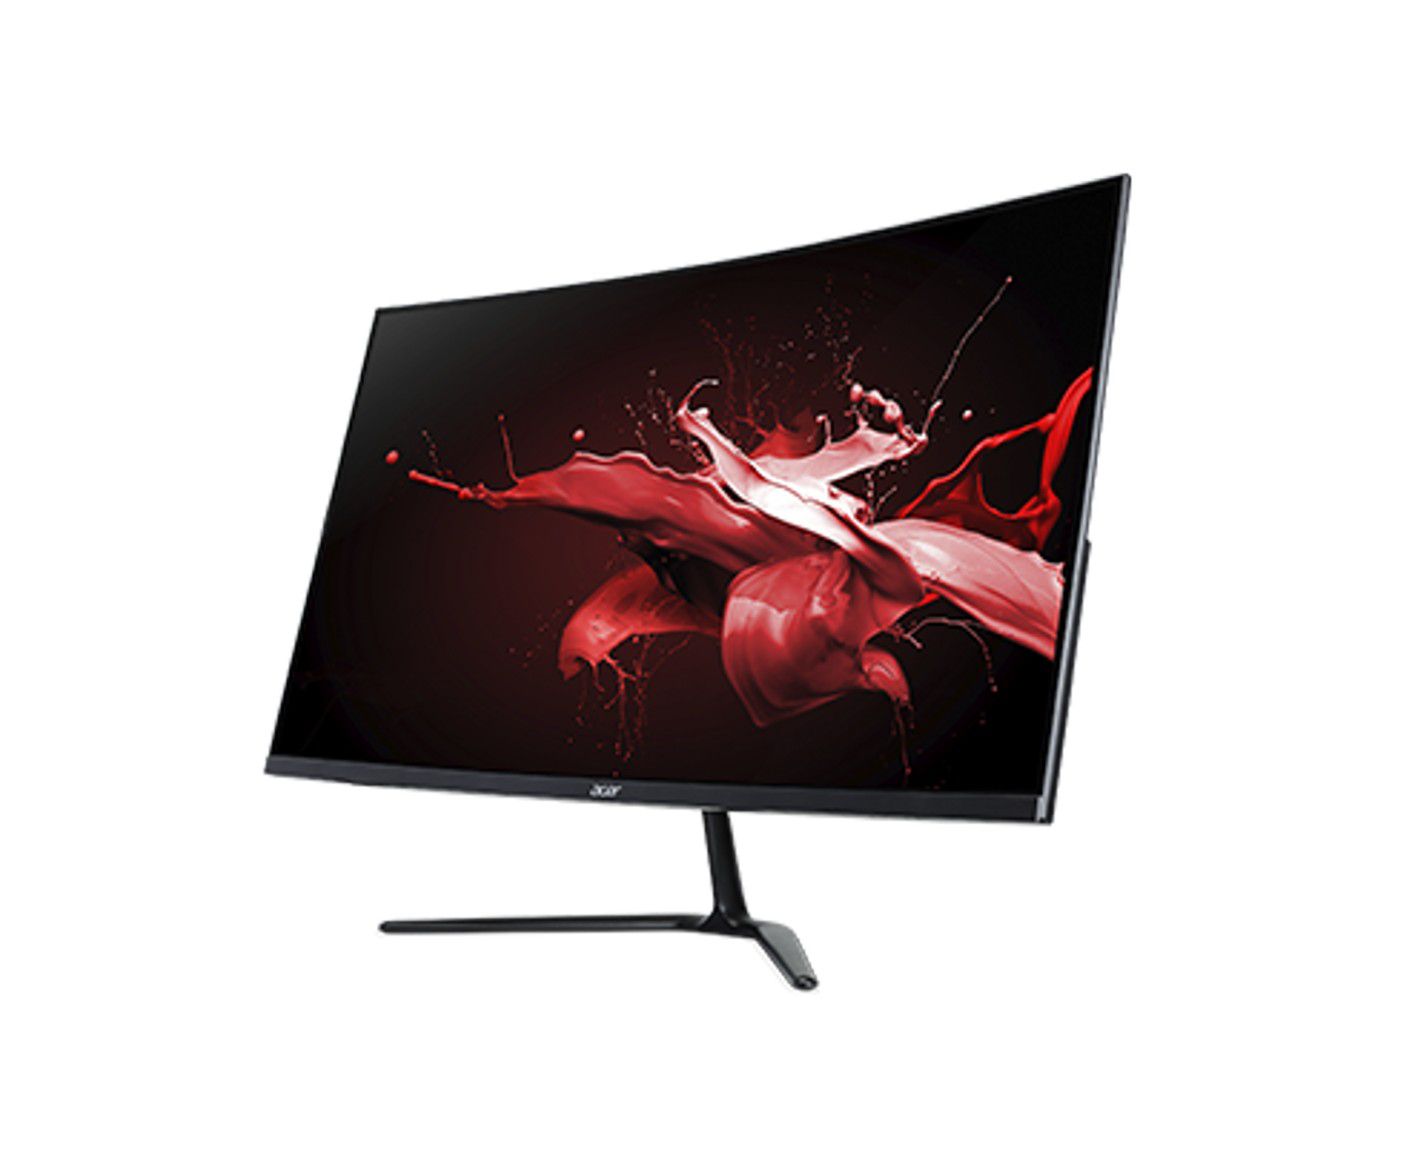 NEW IN BOX Acer 32" inch CURVED 165hz Gaming Monitor - ED320QR Sbiipx